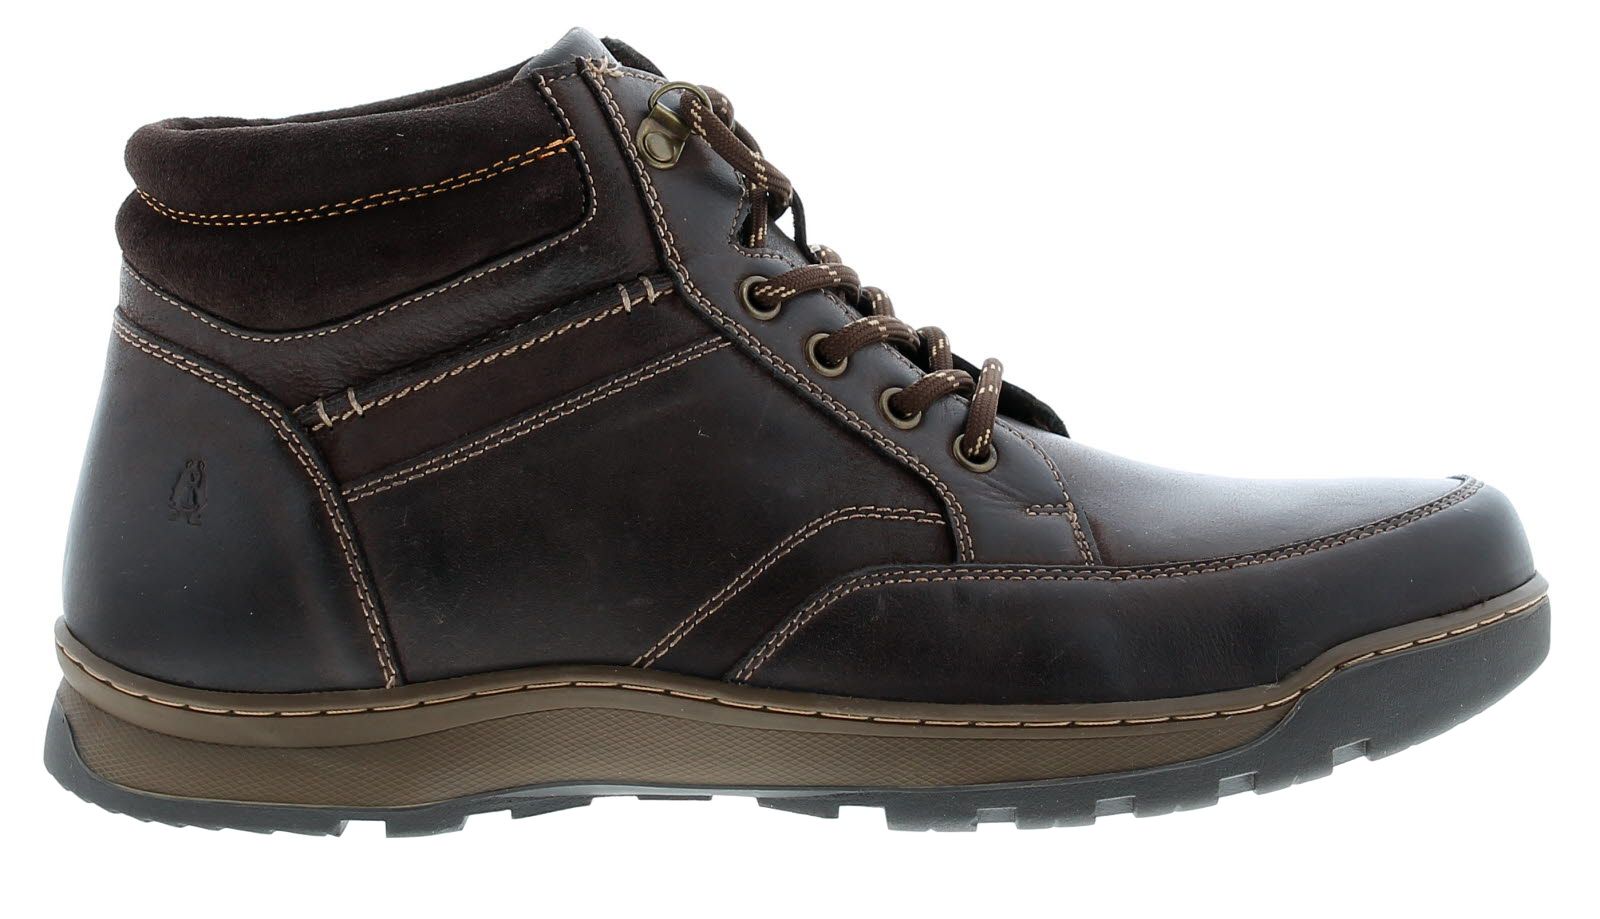 Men's Alpine boot; Grover is crafted with leather, padded suede and has a comfortable cushioned memory foam footbed. The hardwearing flexible sole unit makes this the perfect smart all day footwear.Leather upper with padded suede collar. 
Breathable textile lining. 
Lace up fastening. 
Memory foam comfort insole. 
Heardwearing rubber sole unit.